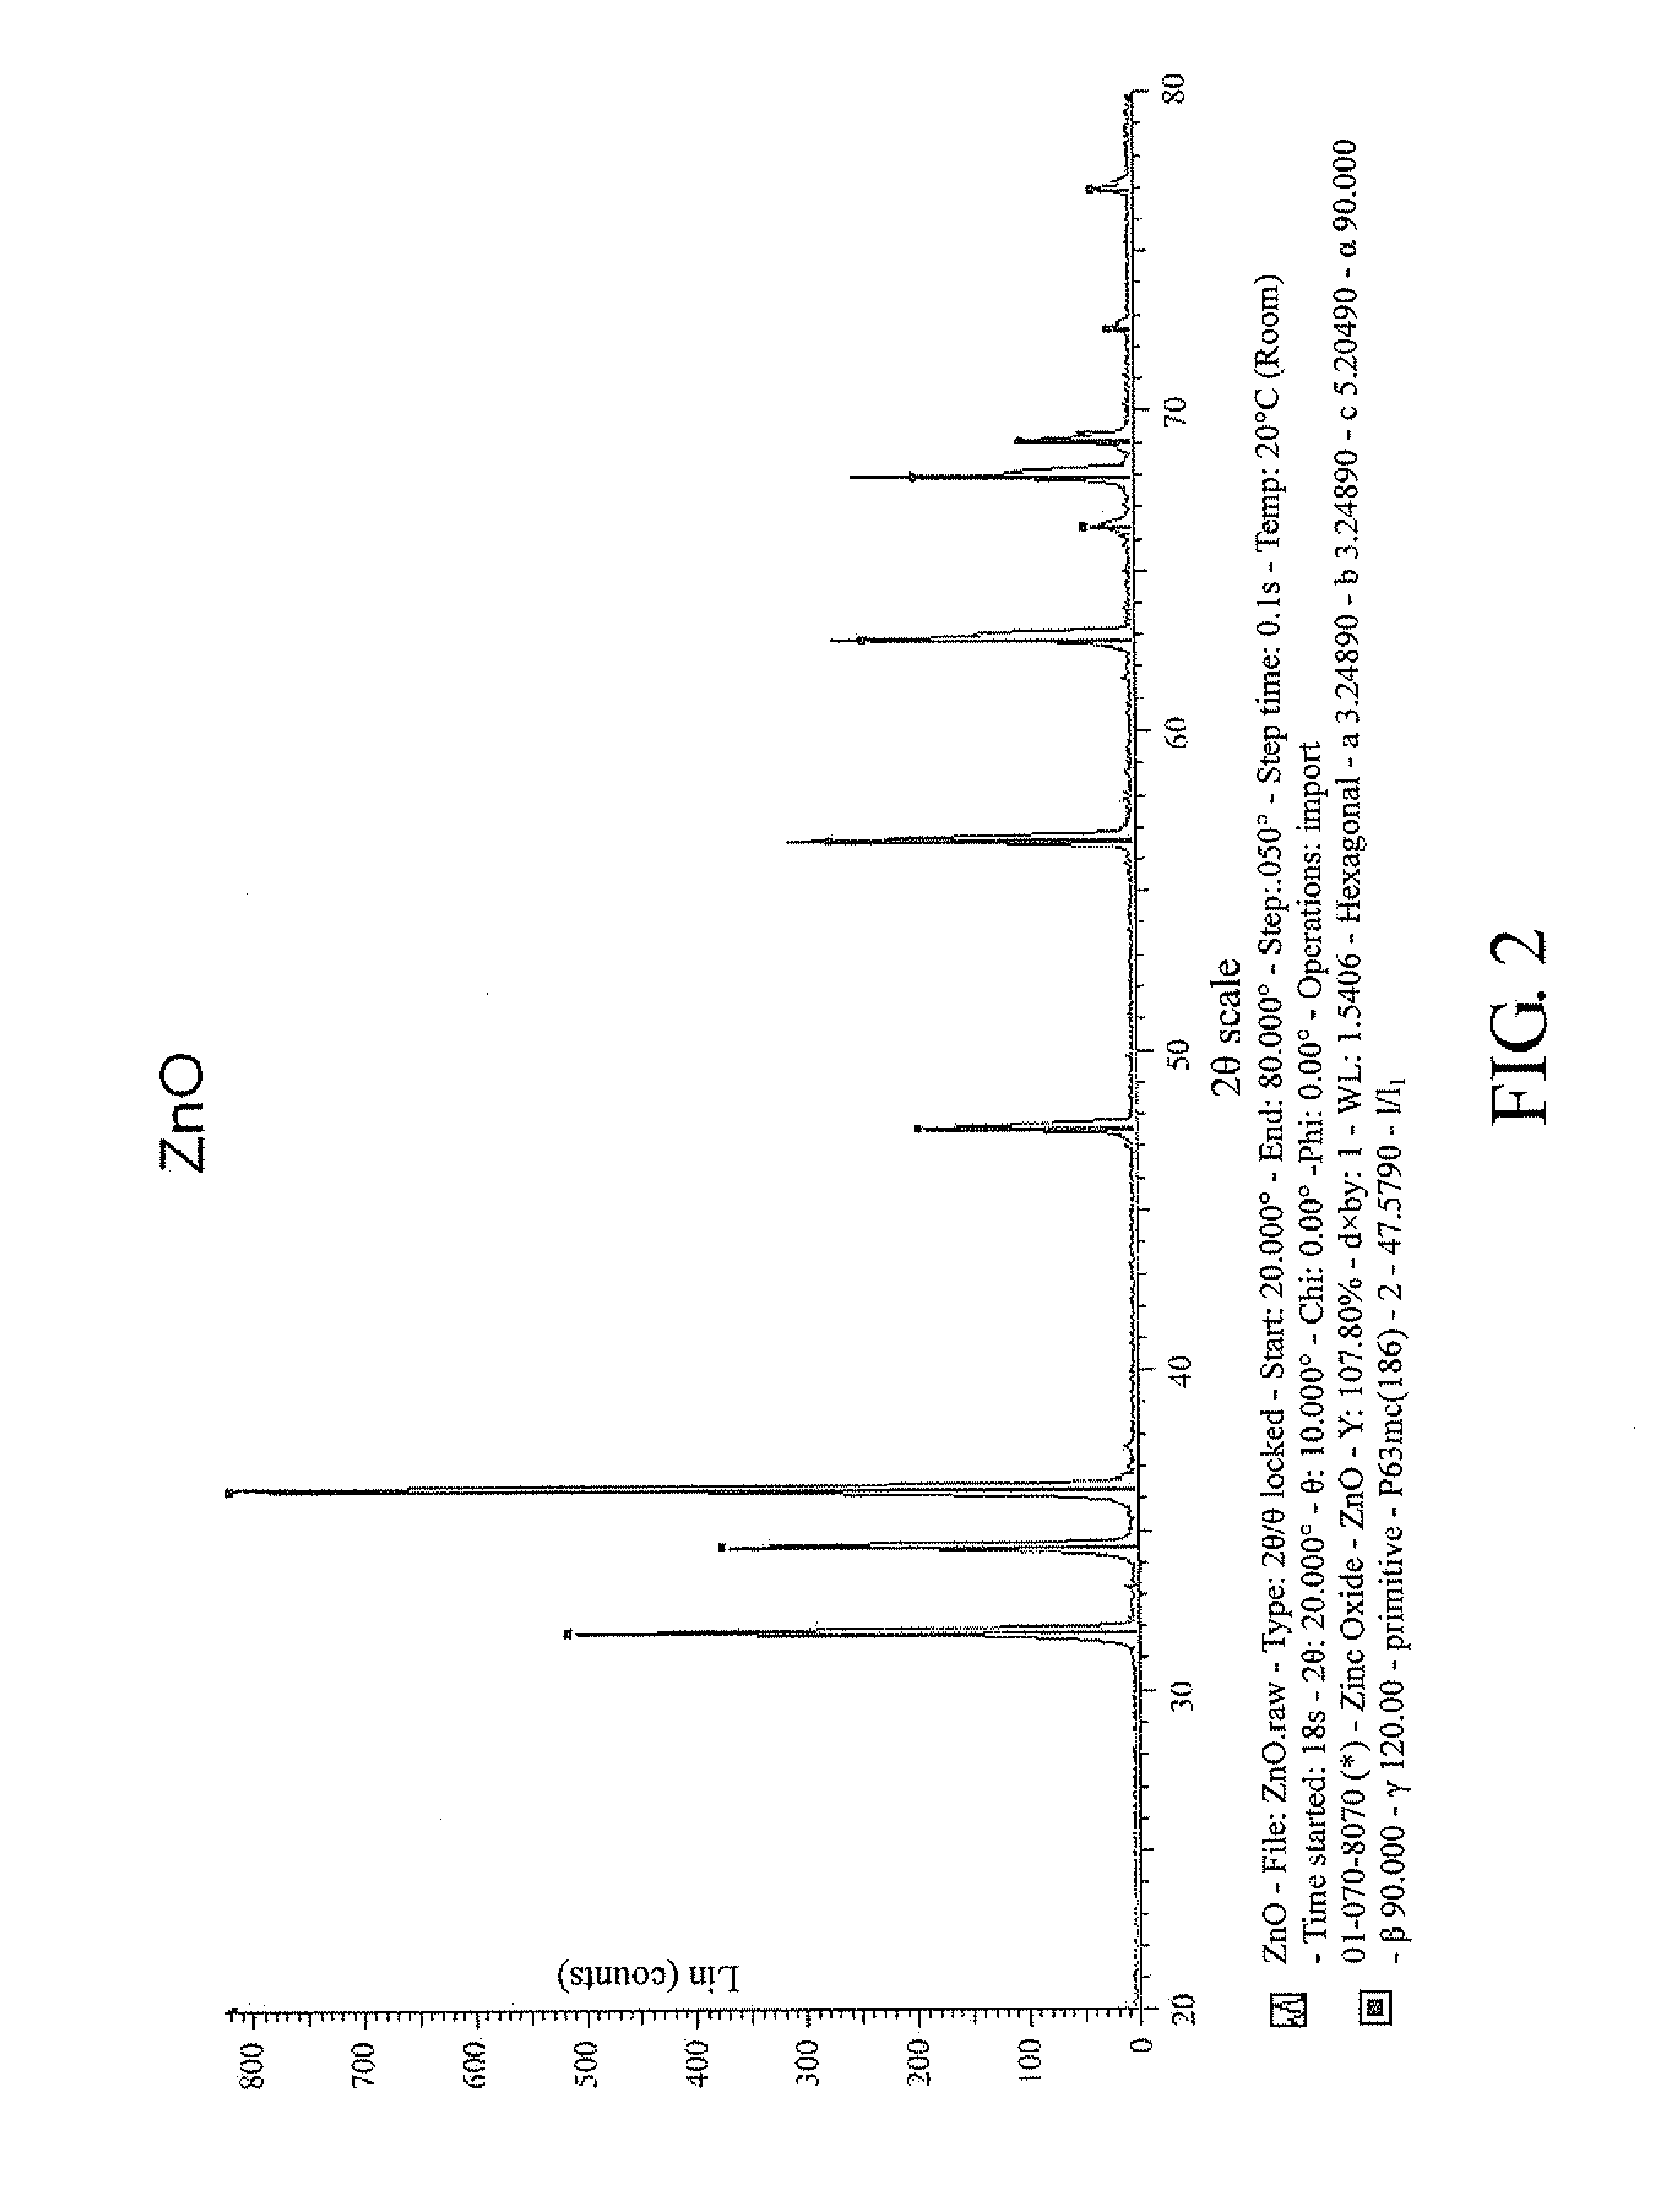 Process for producing multilayer chip zinc oxide varistor containing pure silver internal electrodes and firing at ultralow temperature